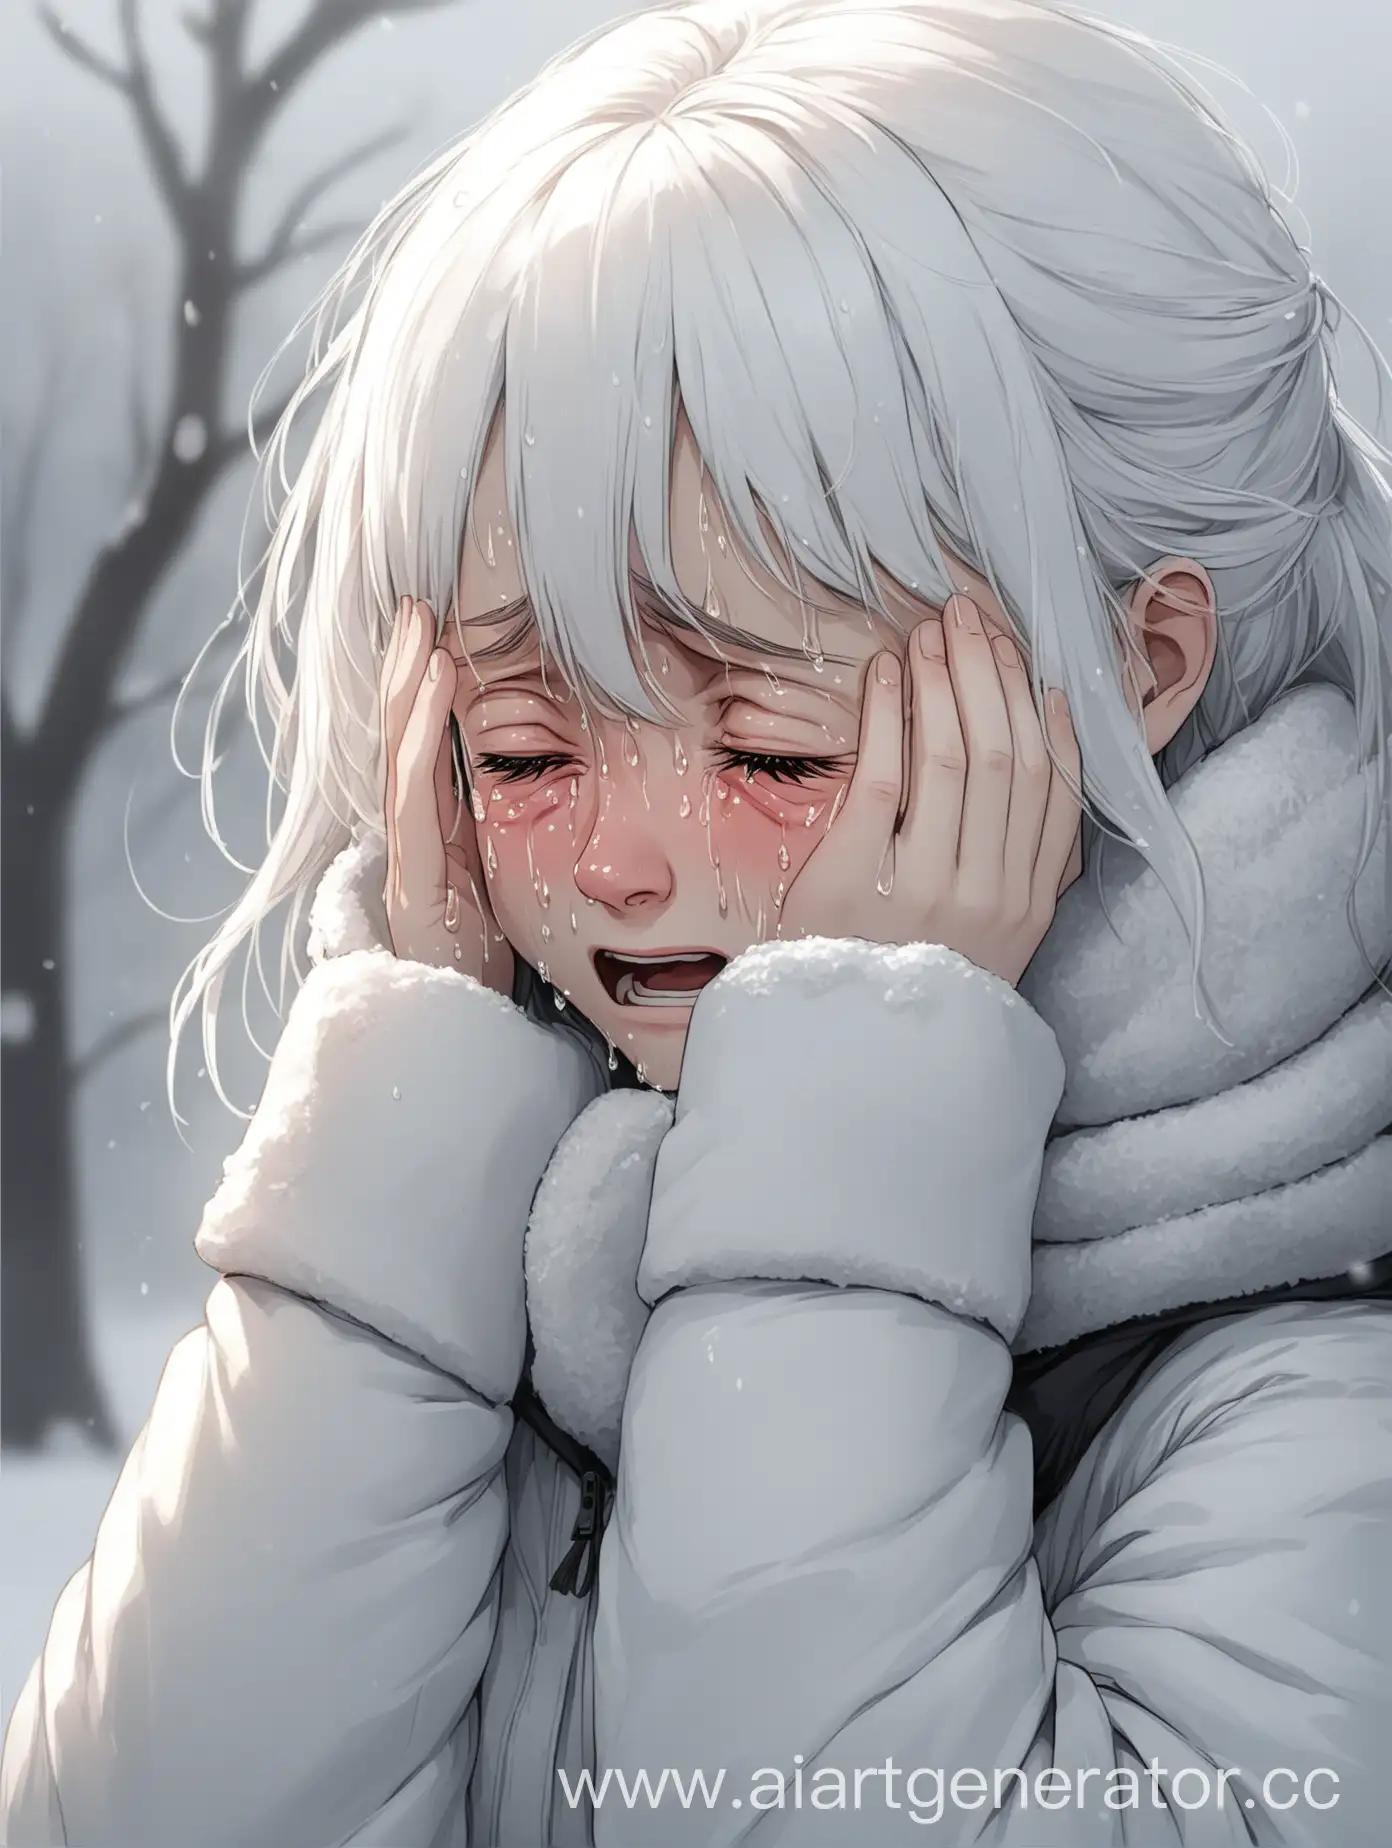 A girl with white hair and in winter clothes is crying